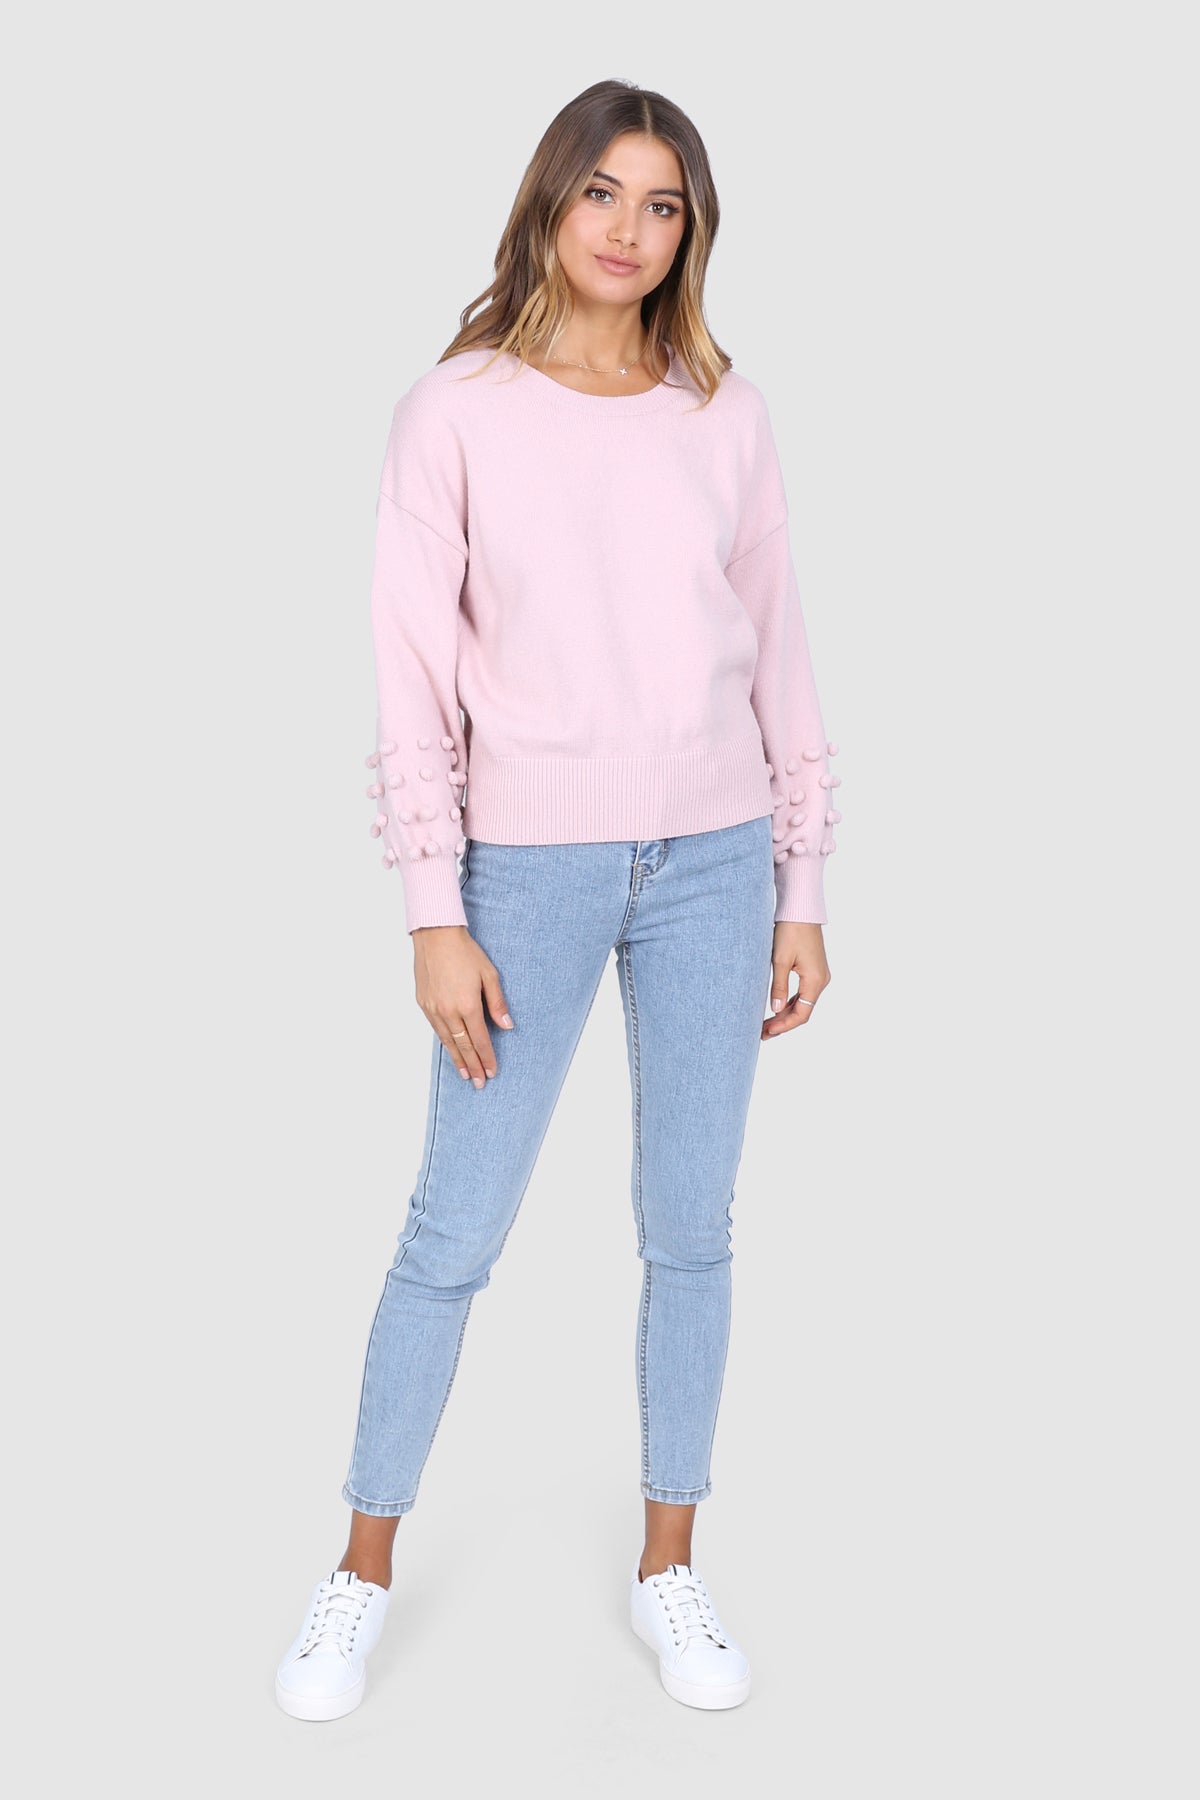 Bailage Haired Caucasian Female wearing Soft Knit Sweater  Cozy Pullover  Flattering Scoop Neckline  Balloon Long Sleeves  Lightweight  Pom Pom Detailed Sleeves  Ribbed Hemline and Cuffs  paired with high waisted light washed skinny jeans and white sneakers